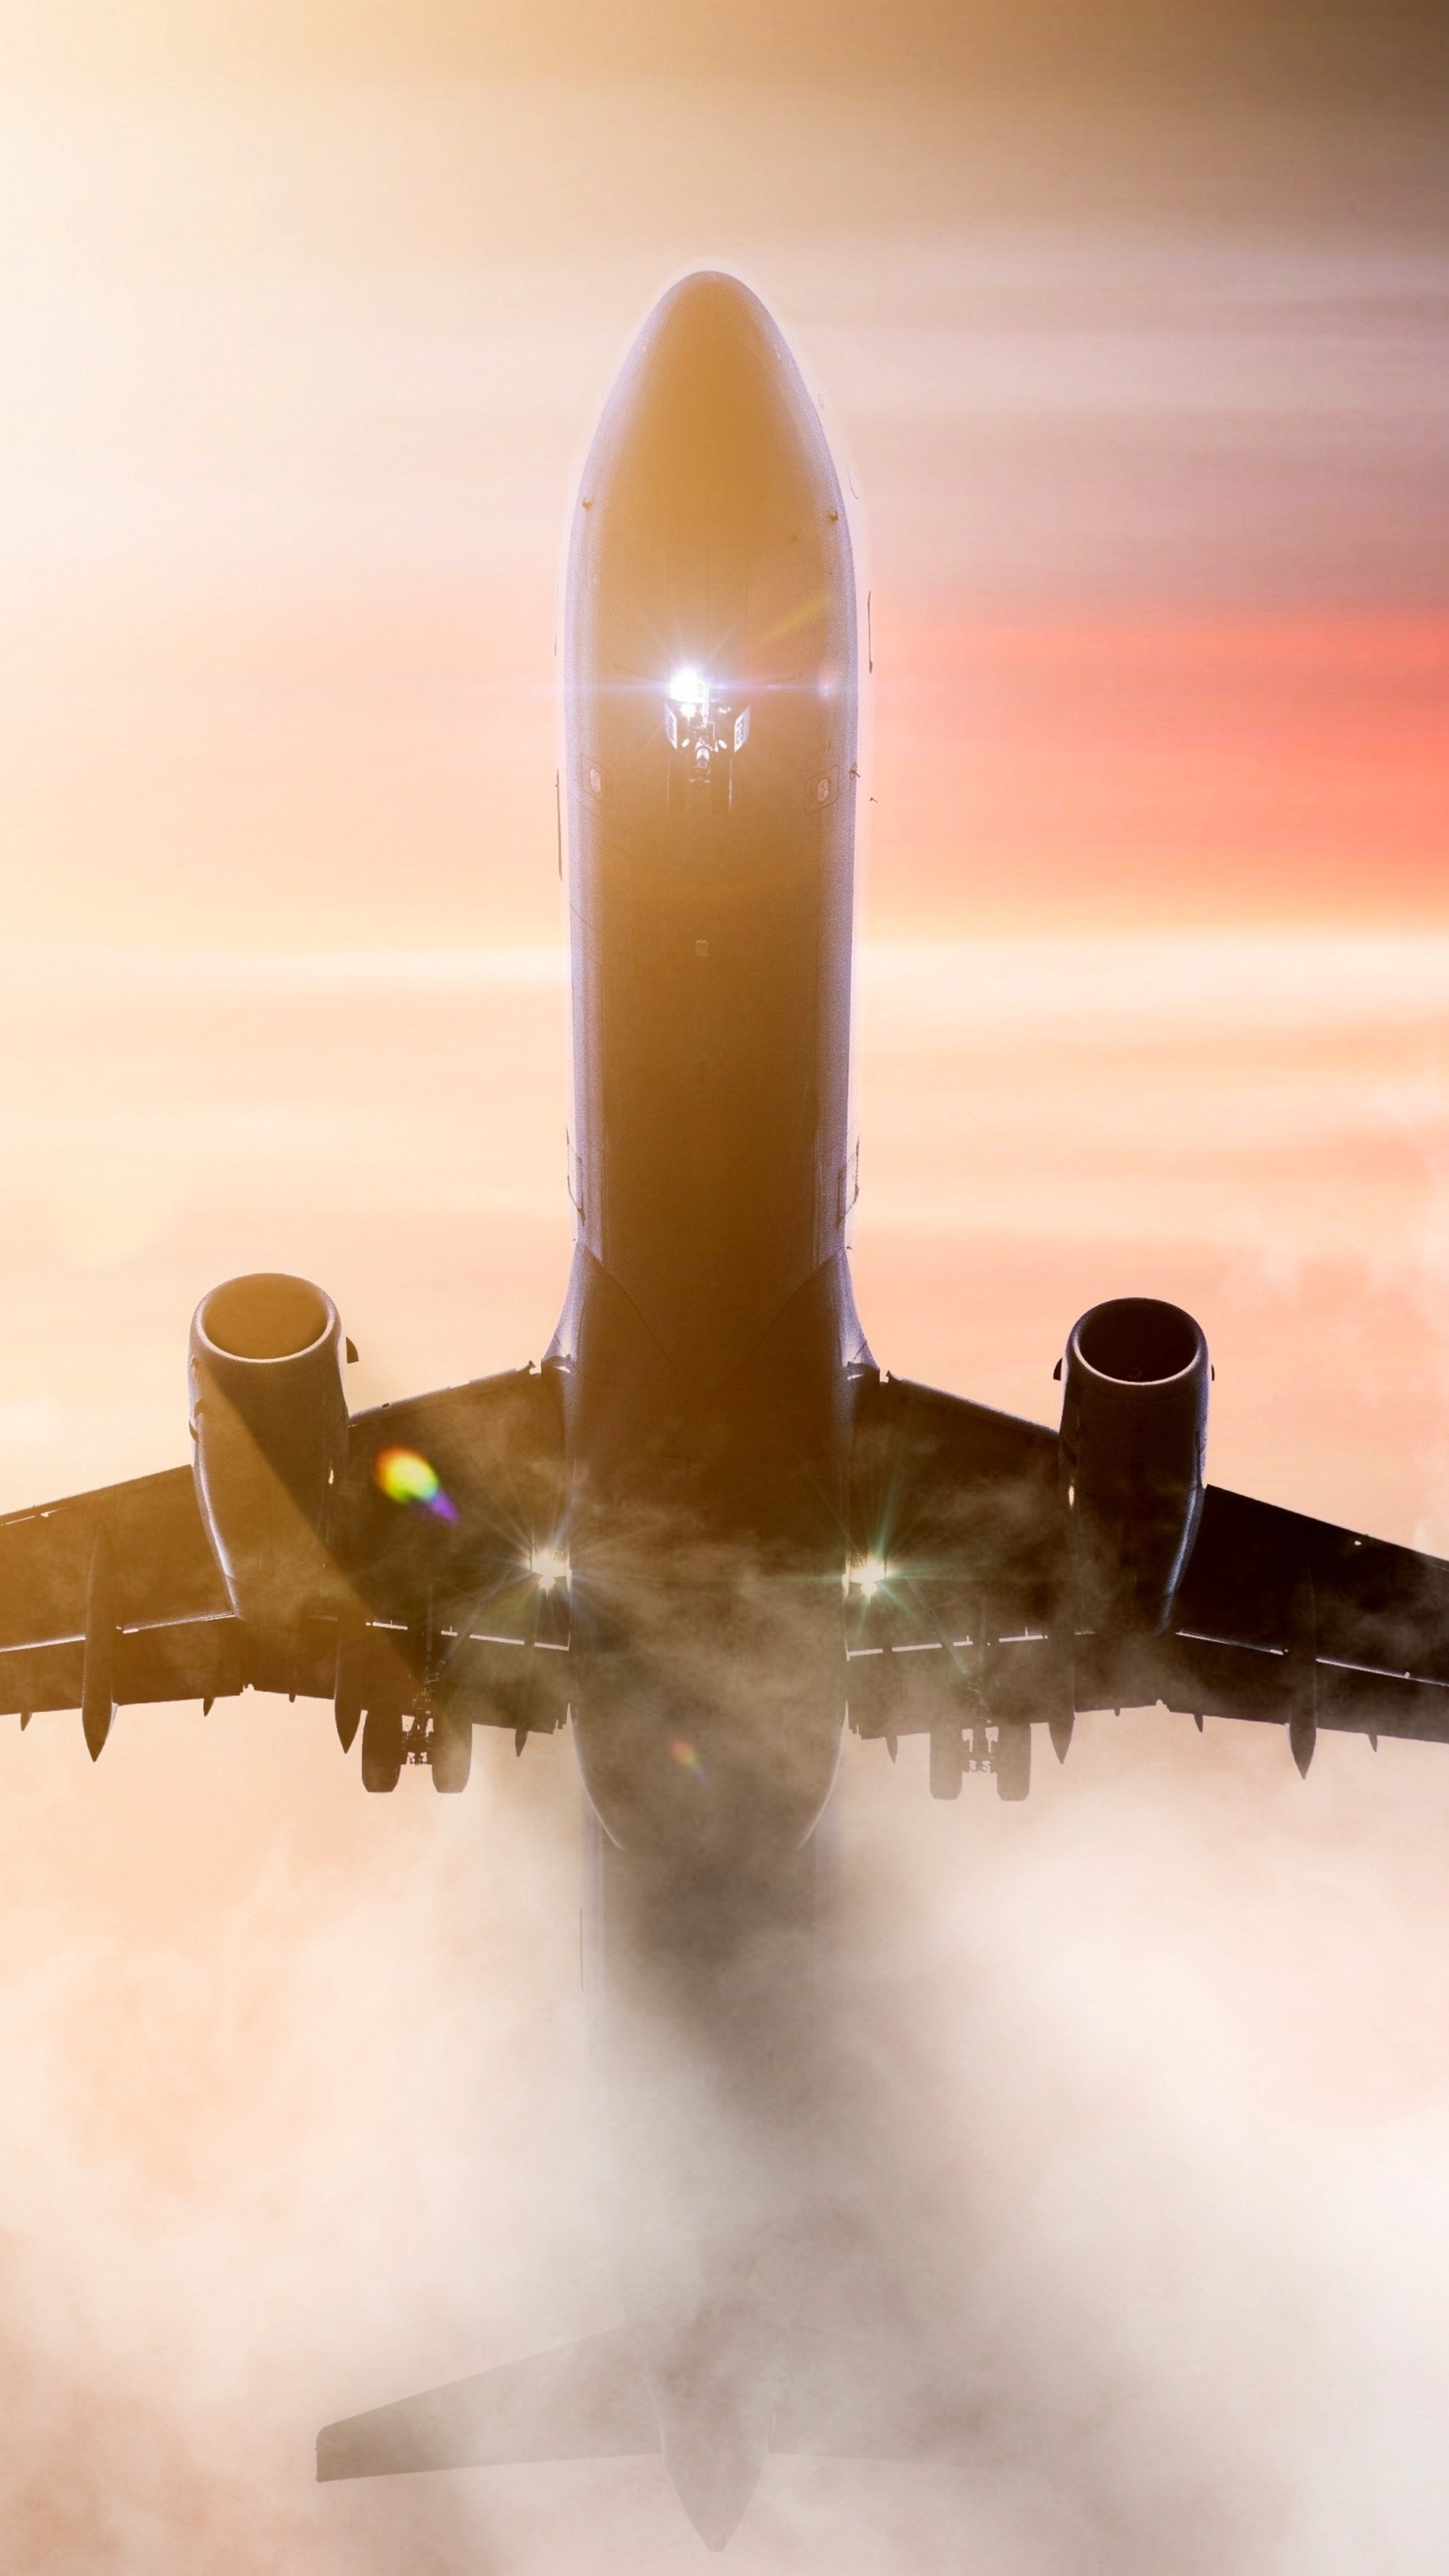 Airplane, 4K Sony Xperia, High-resolution wallpapers, Stunning visuals, 2160x3840 4K Handy